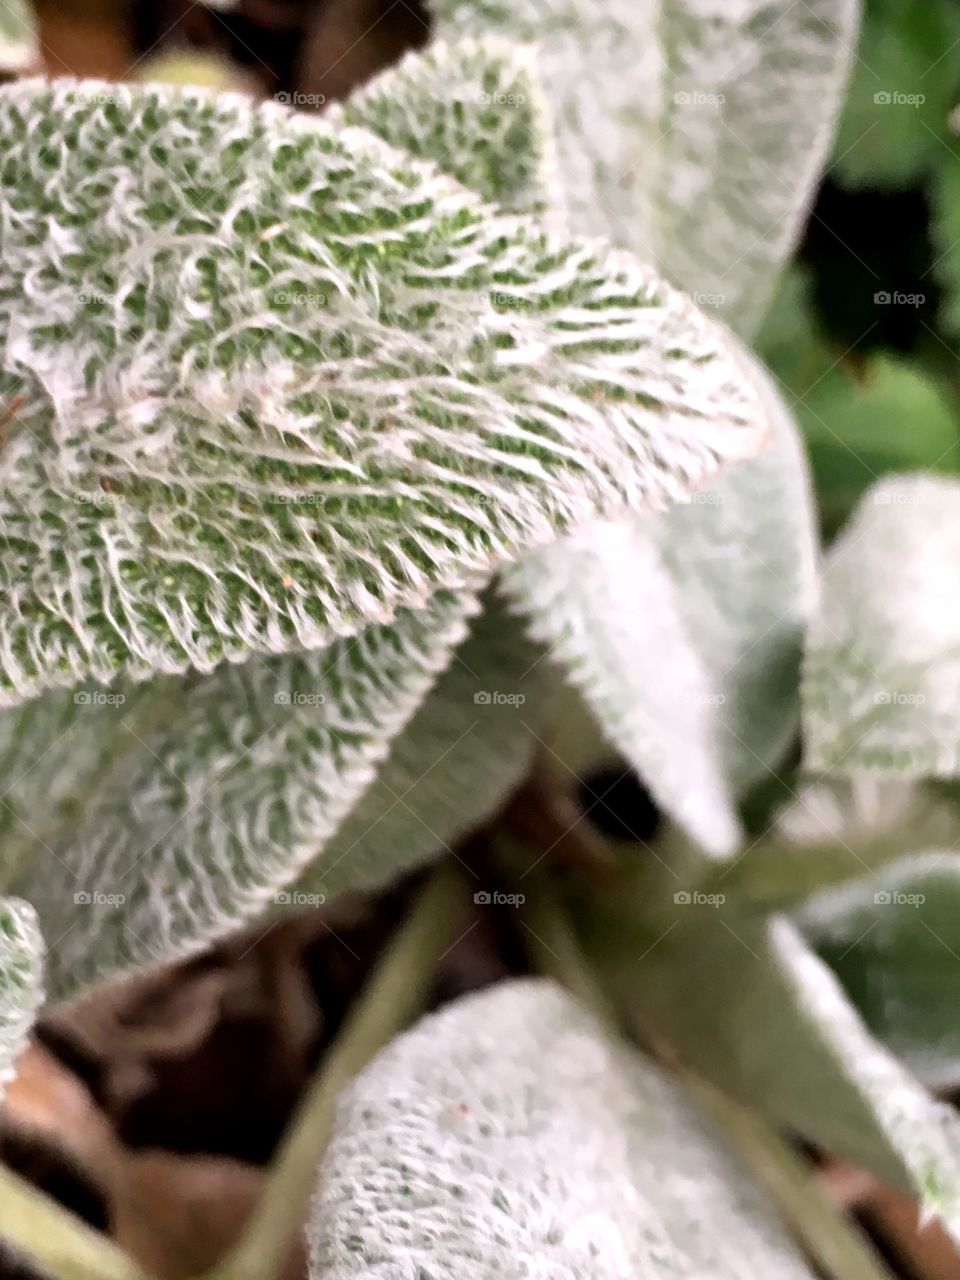 The fascinating lamb's ear plant